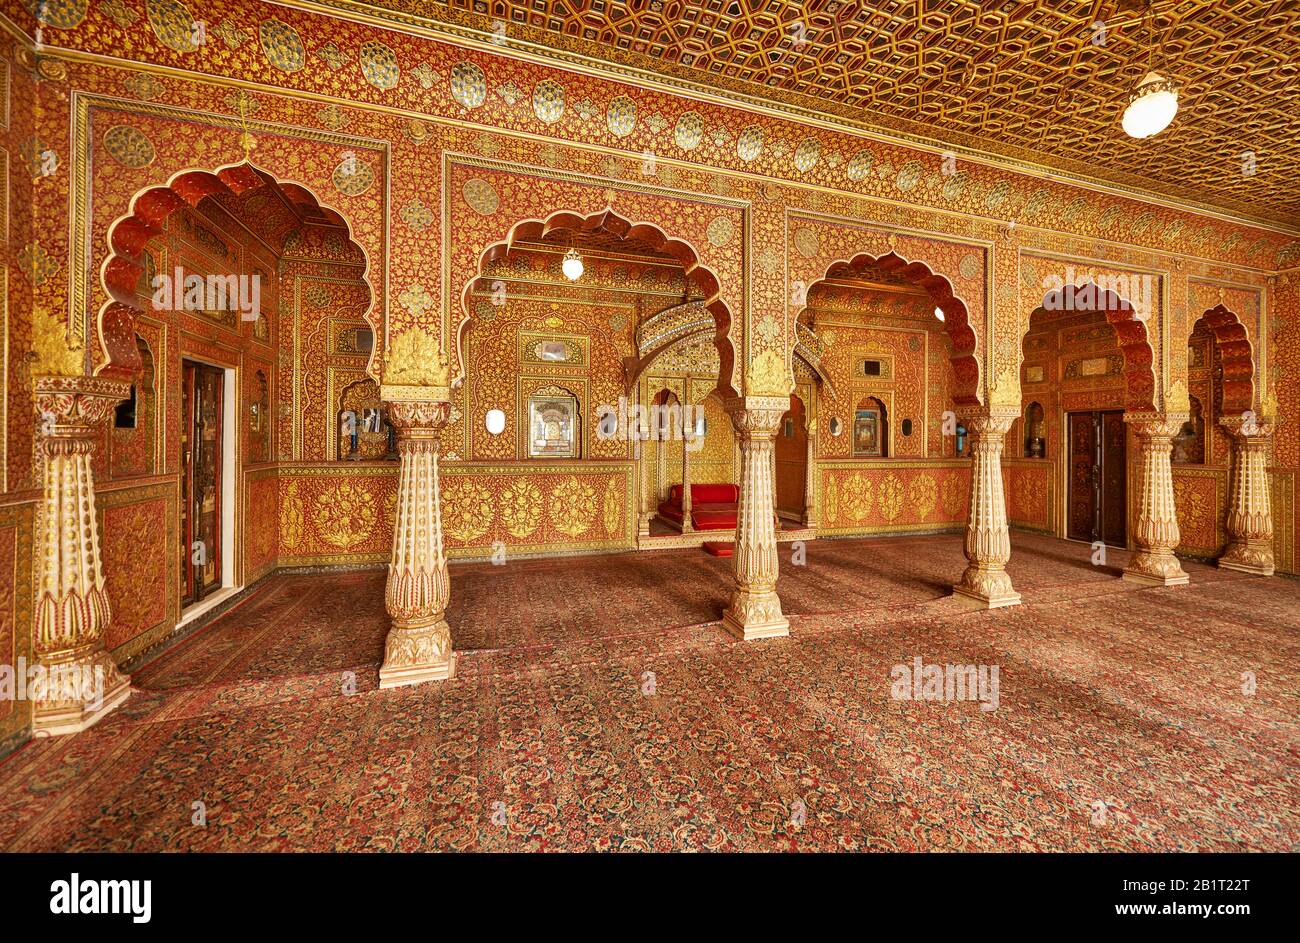 Karan Mahal, public audience hall, emperor throne, Exquisite glass inlay work, room heavily decorated with colored mirrors inside Junagarh Fort Stock Photo